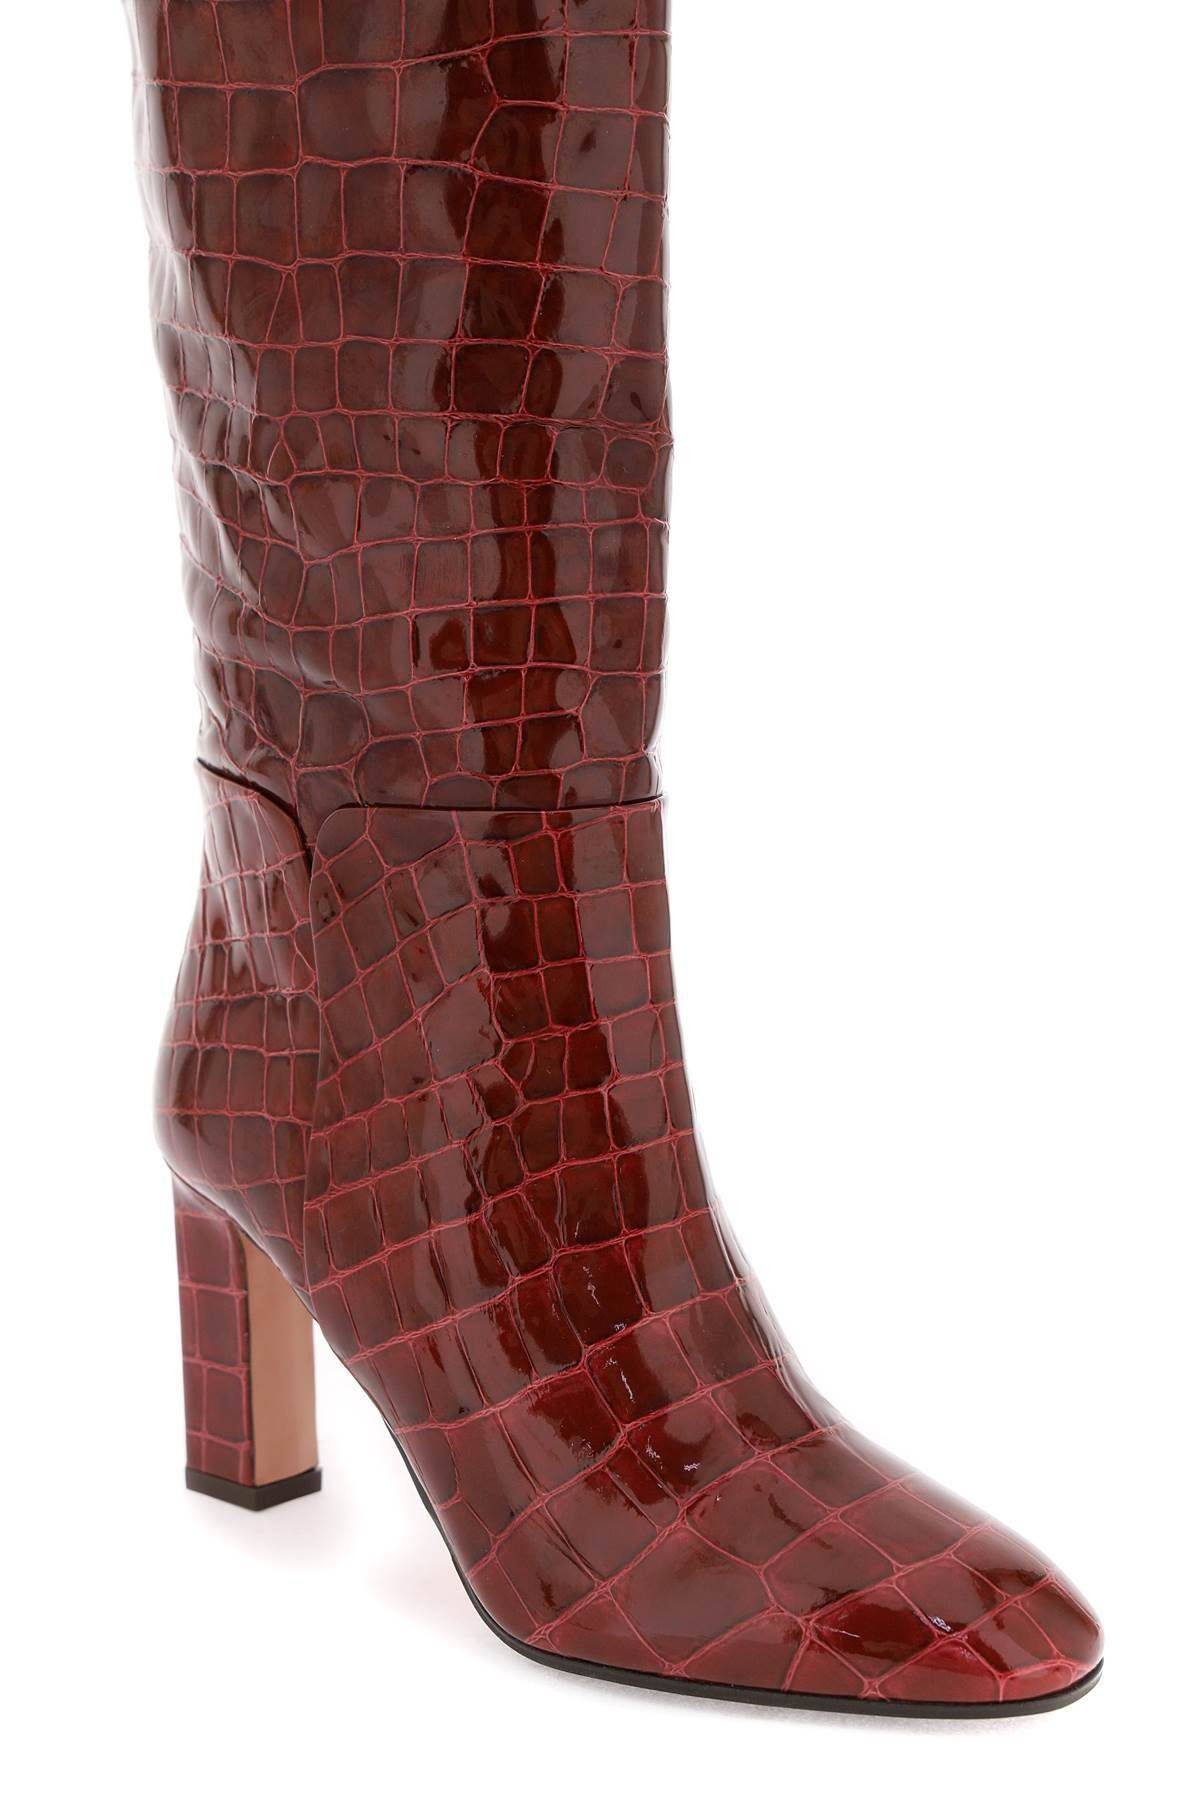 SELLIER BOOTS IN CROC-EMBOSSED LEATHER - 4